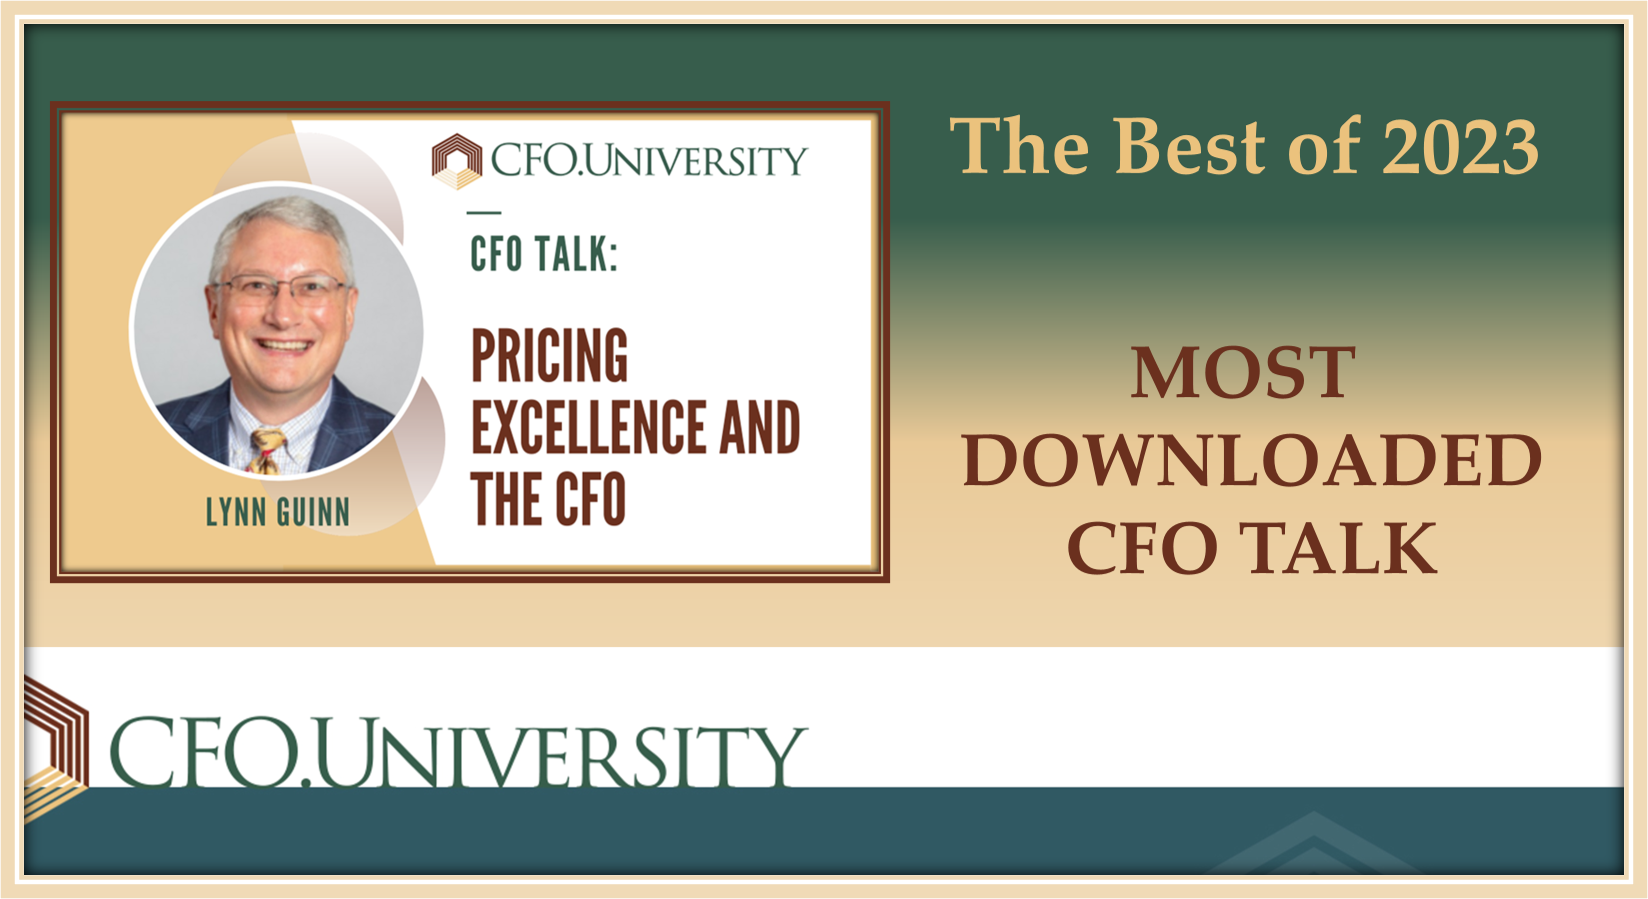 CFO Talk: Pricing Excellence and the CFO with Lynn Guinn